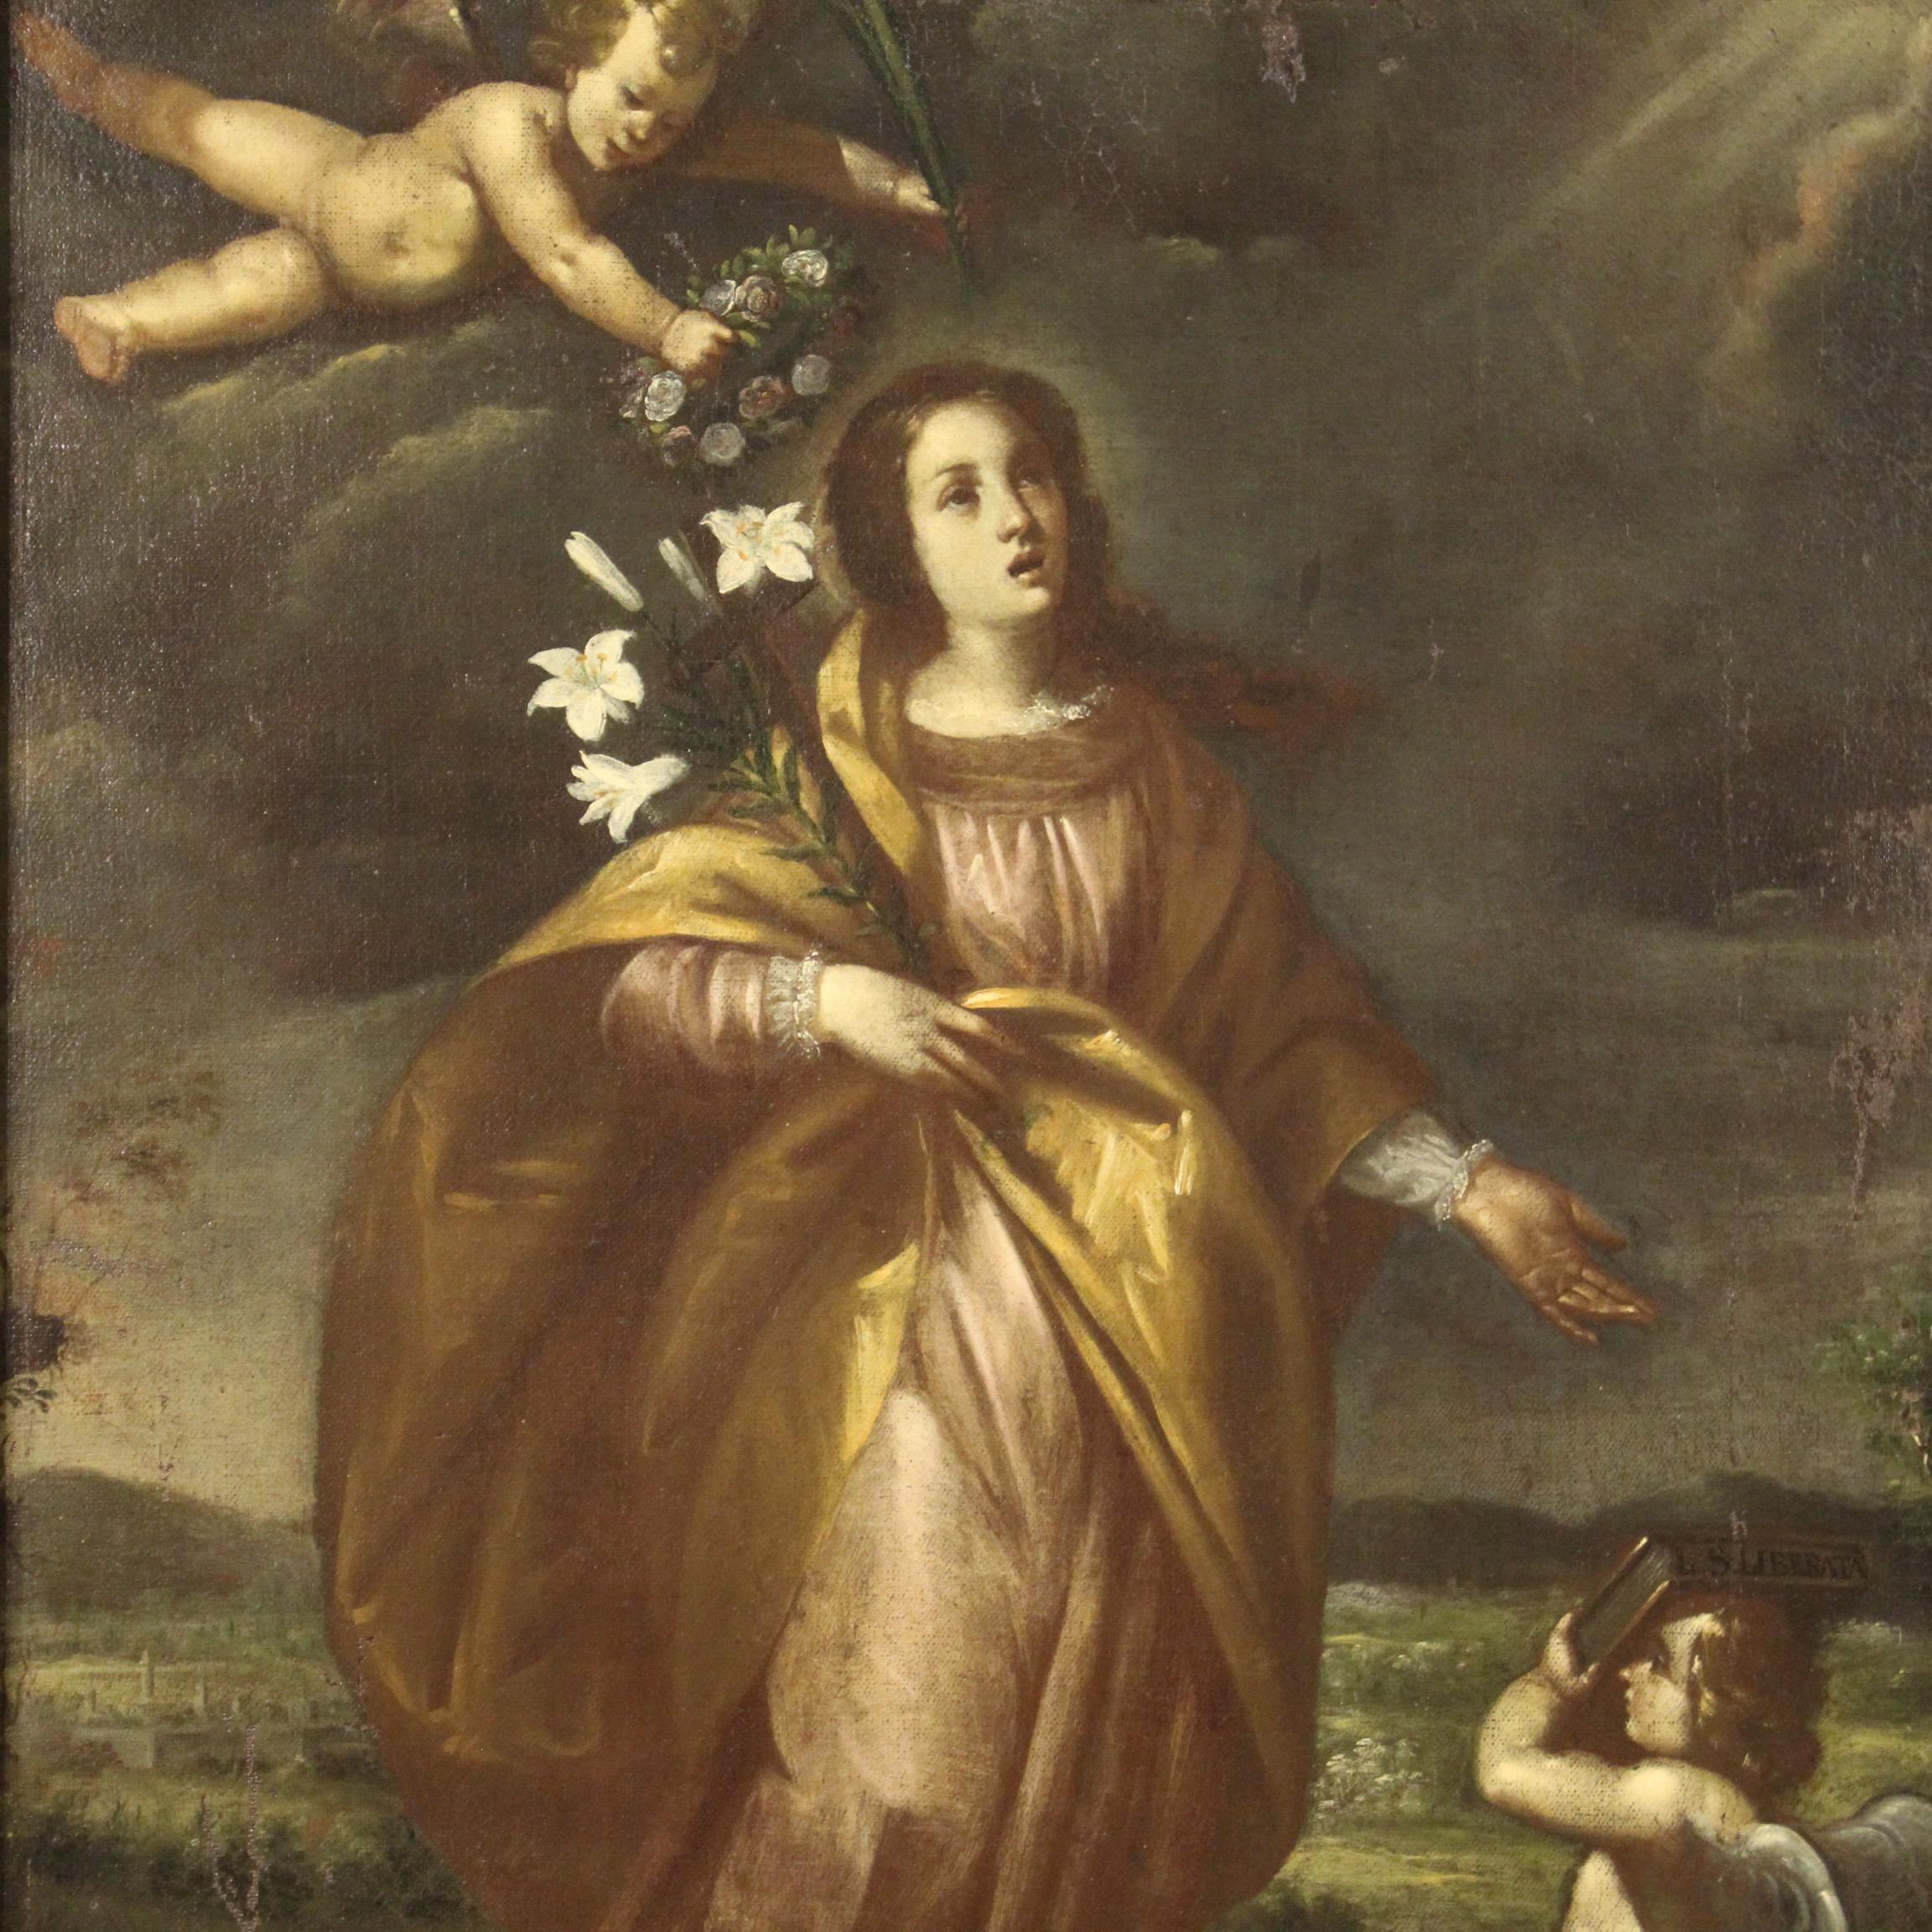 Antique Italian painting from the late 17th century. Oil on canvas framework depicting a religious subject Saint Liberata with cherubs of good pictorial quality. Painting rich in decorative elements, of interesting perspective with a view of the